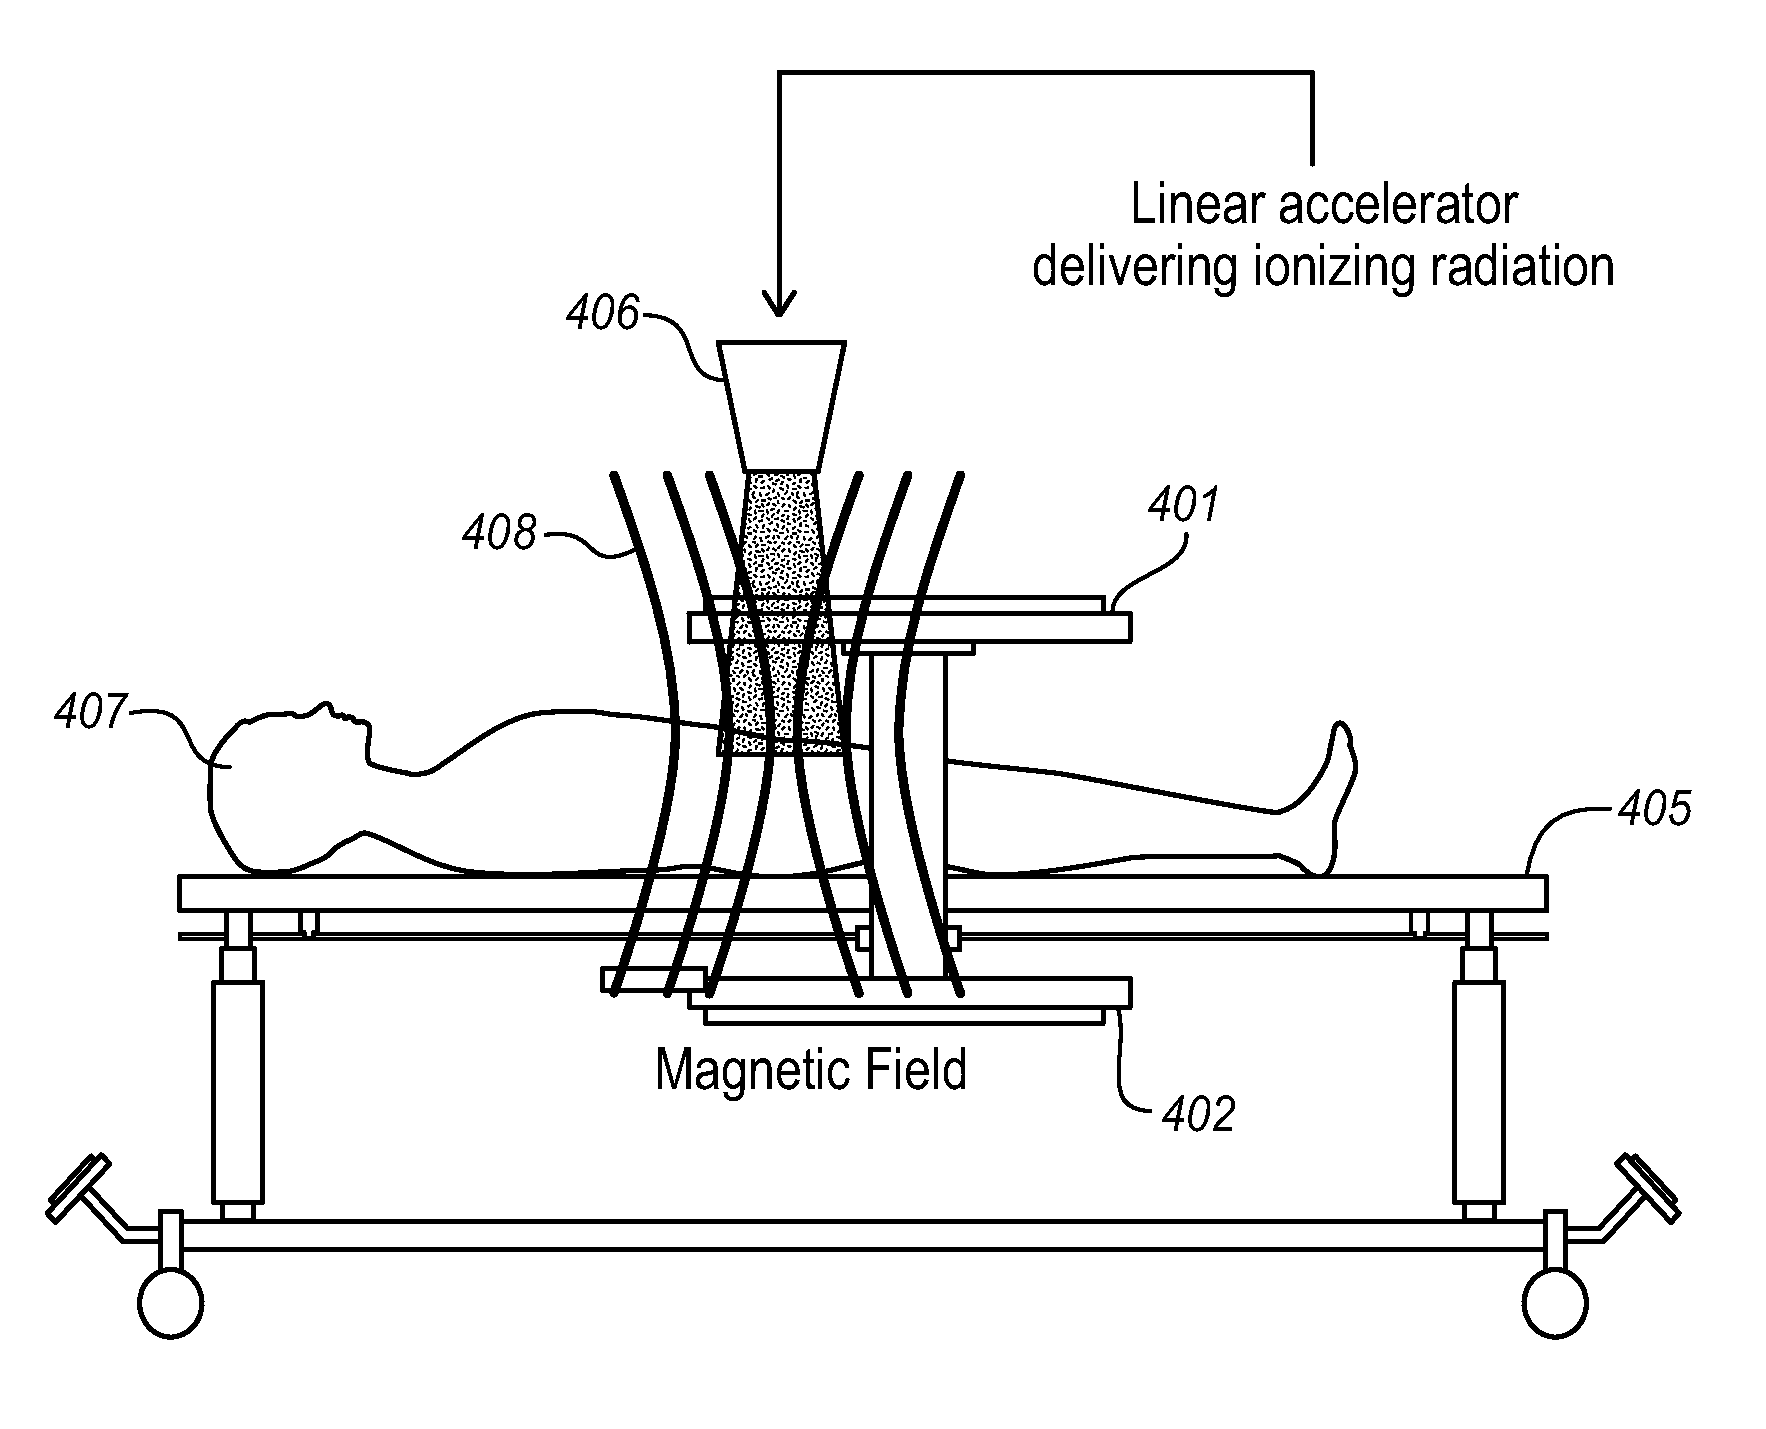 Apparatus for the generation of an energy field for the treatment of cancer in body cavities and parts that are cavity-like